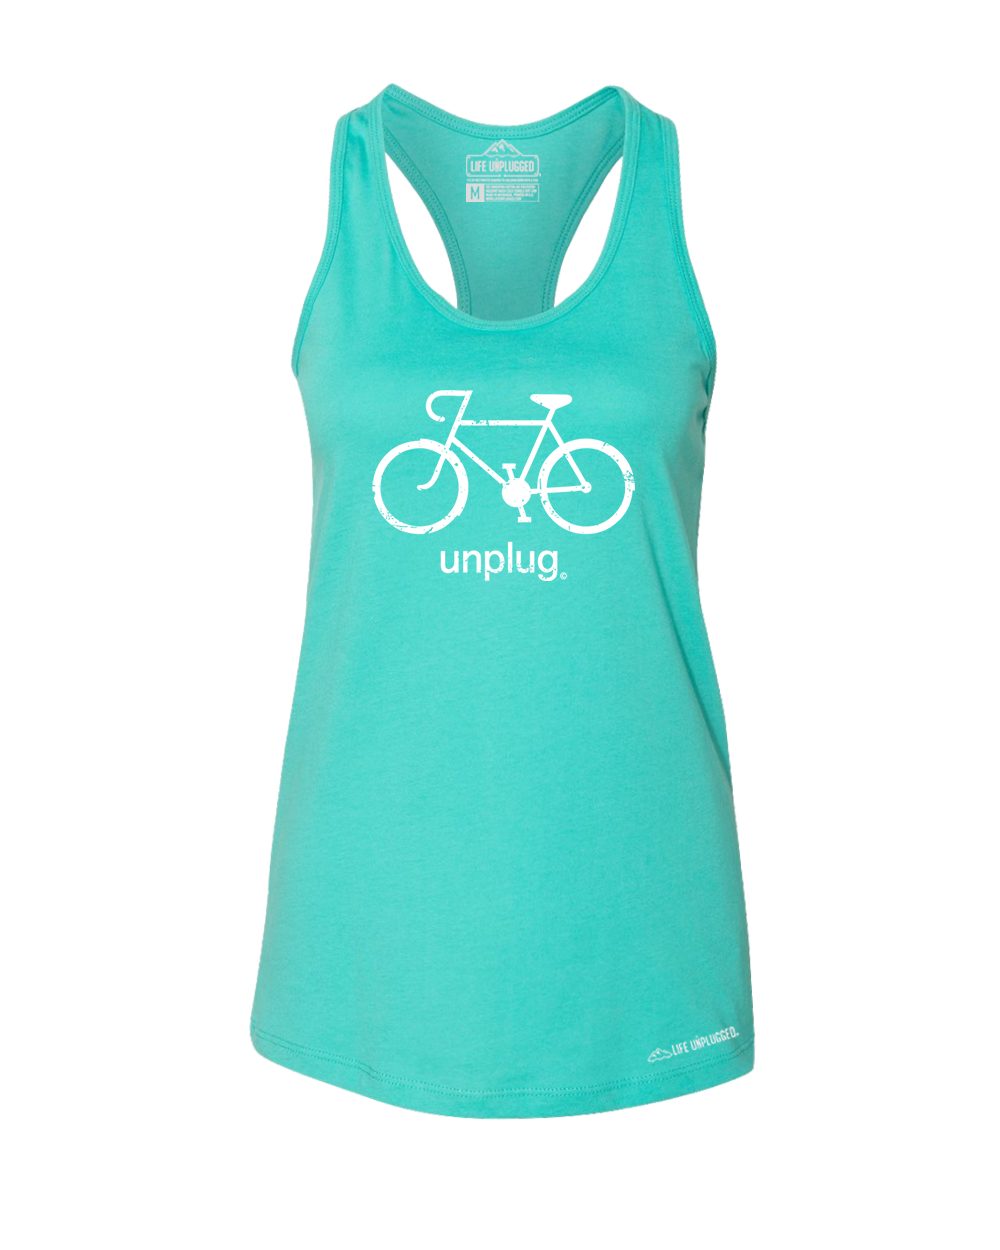 Road Bike Premium Women's Relaxed Fit Racerback Tank Top - Life Unplugged